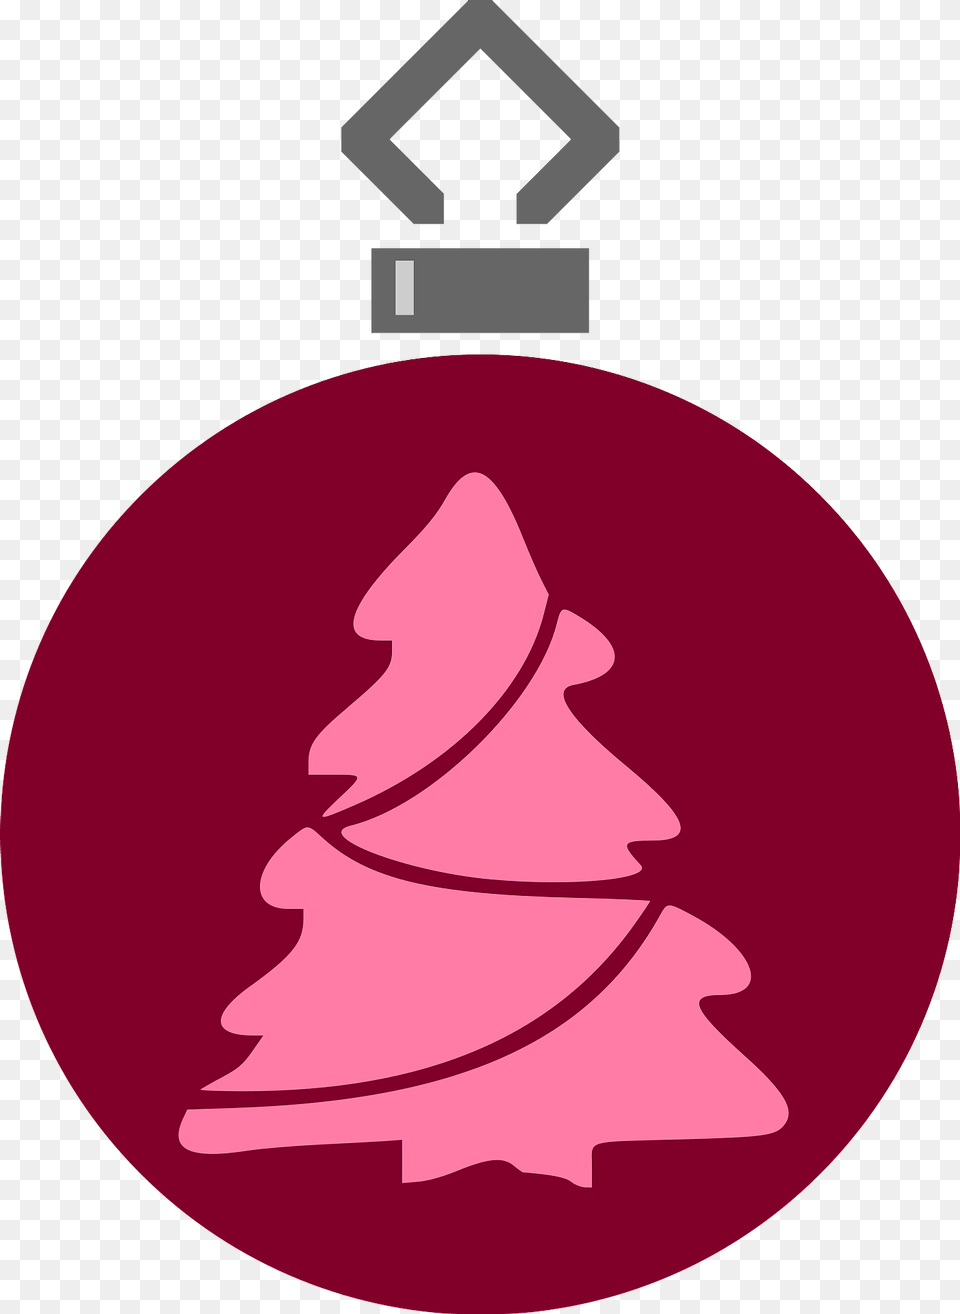 Simple Tree Ornament Svg Upton Park Tube Station, Person, Christmas, Christmas Decorations, Festival Free Transparent Png